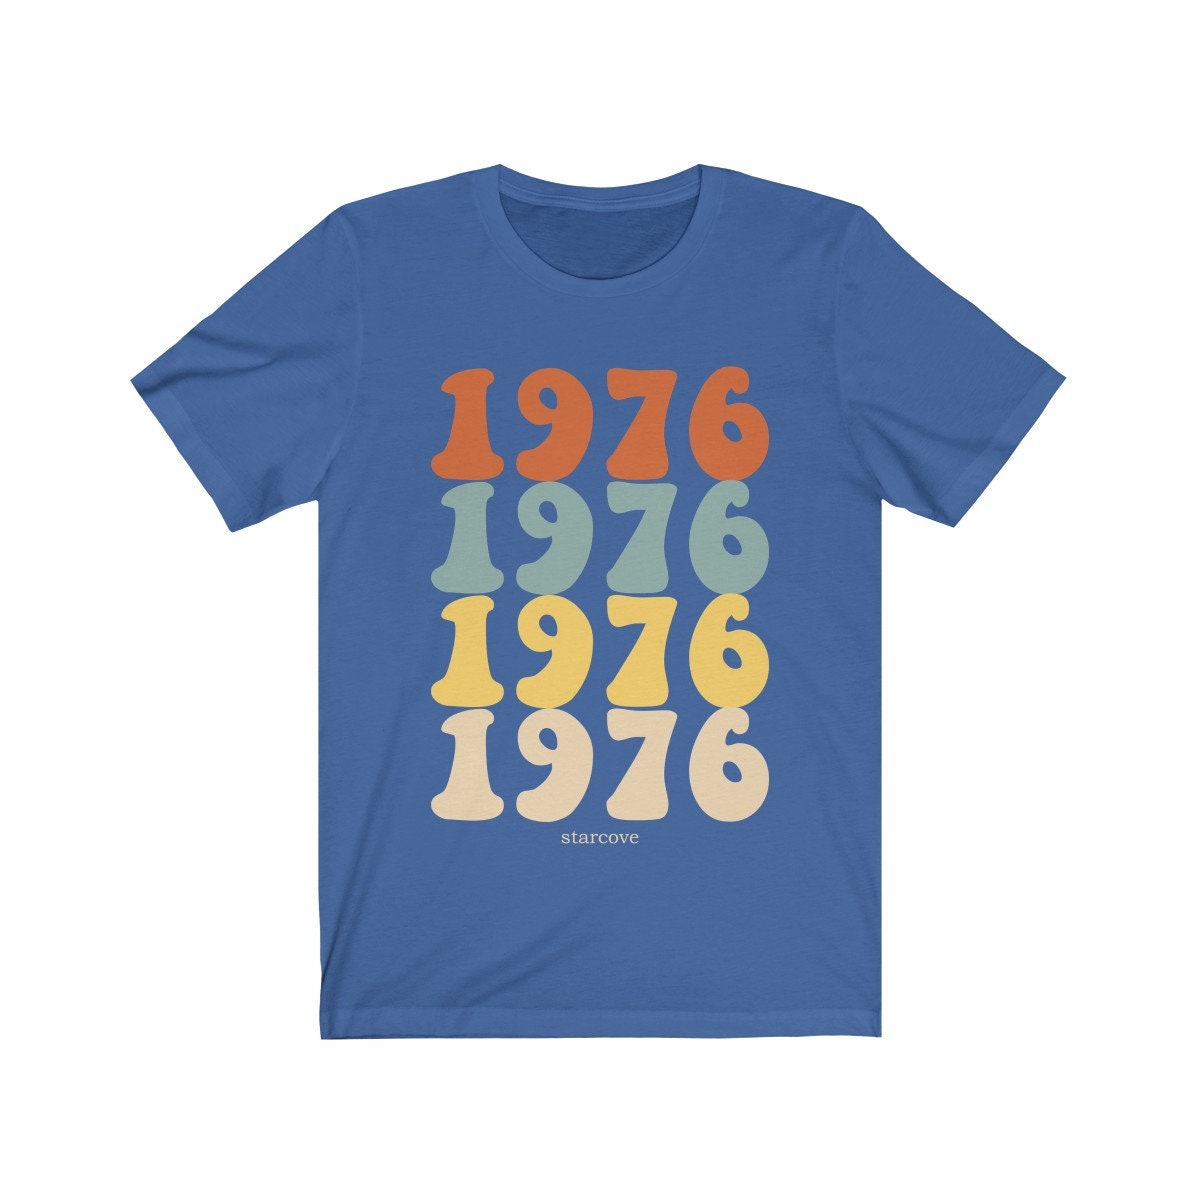 1976 shirt 45th Birthday Party Turning 45 Years Old Born Made in 1976 Funny Present Dad Mom TShirt 70s Retro Vintage gift Idea Women Men